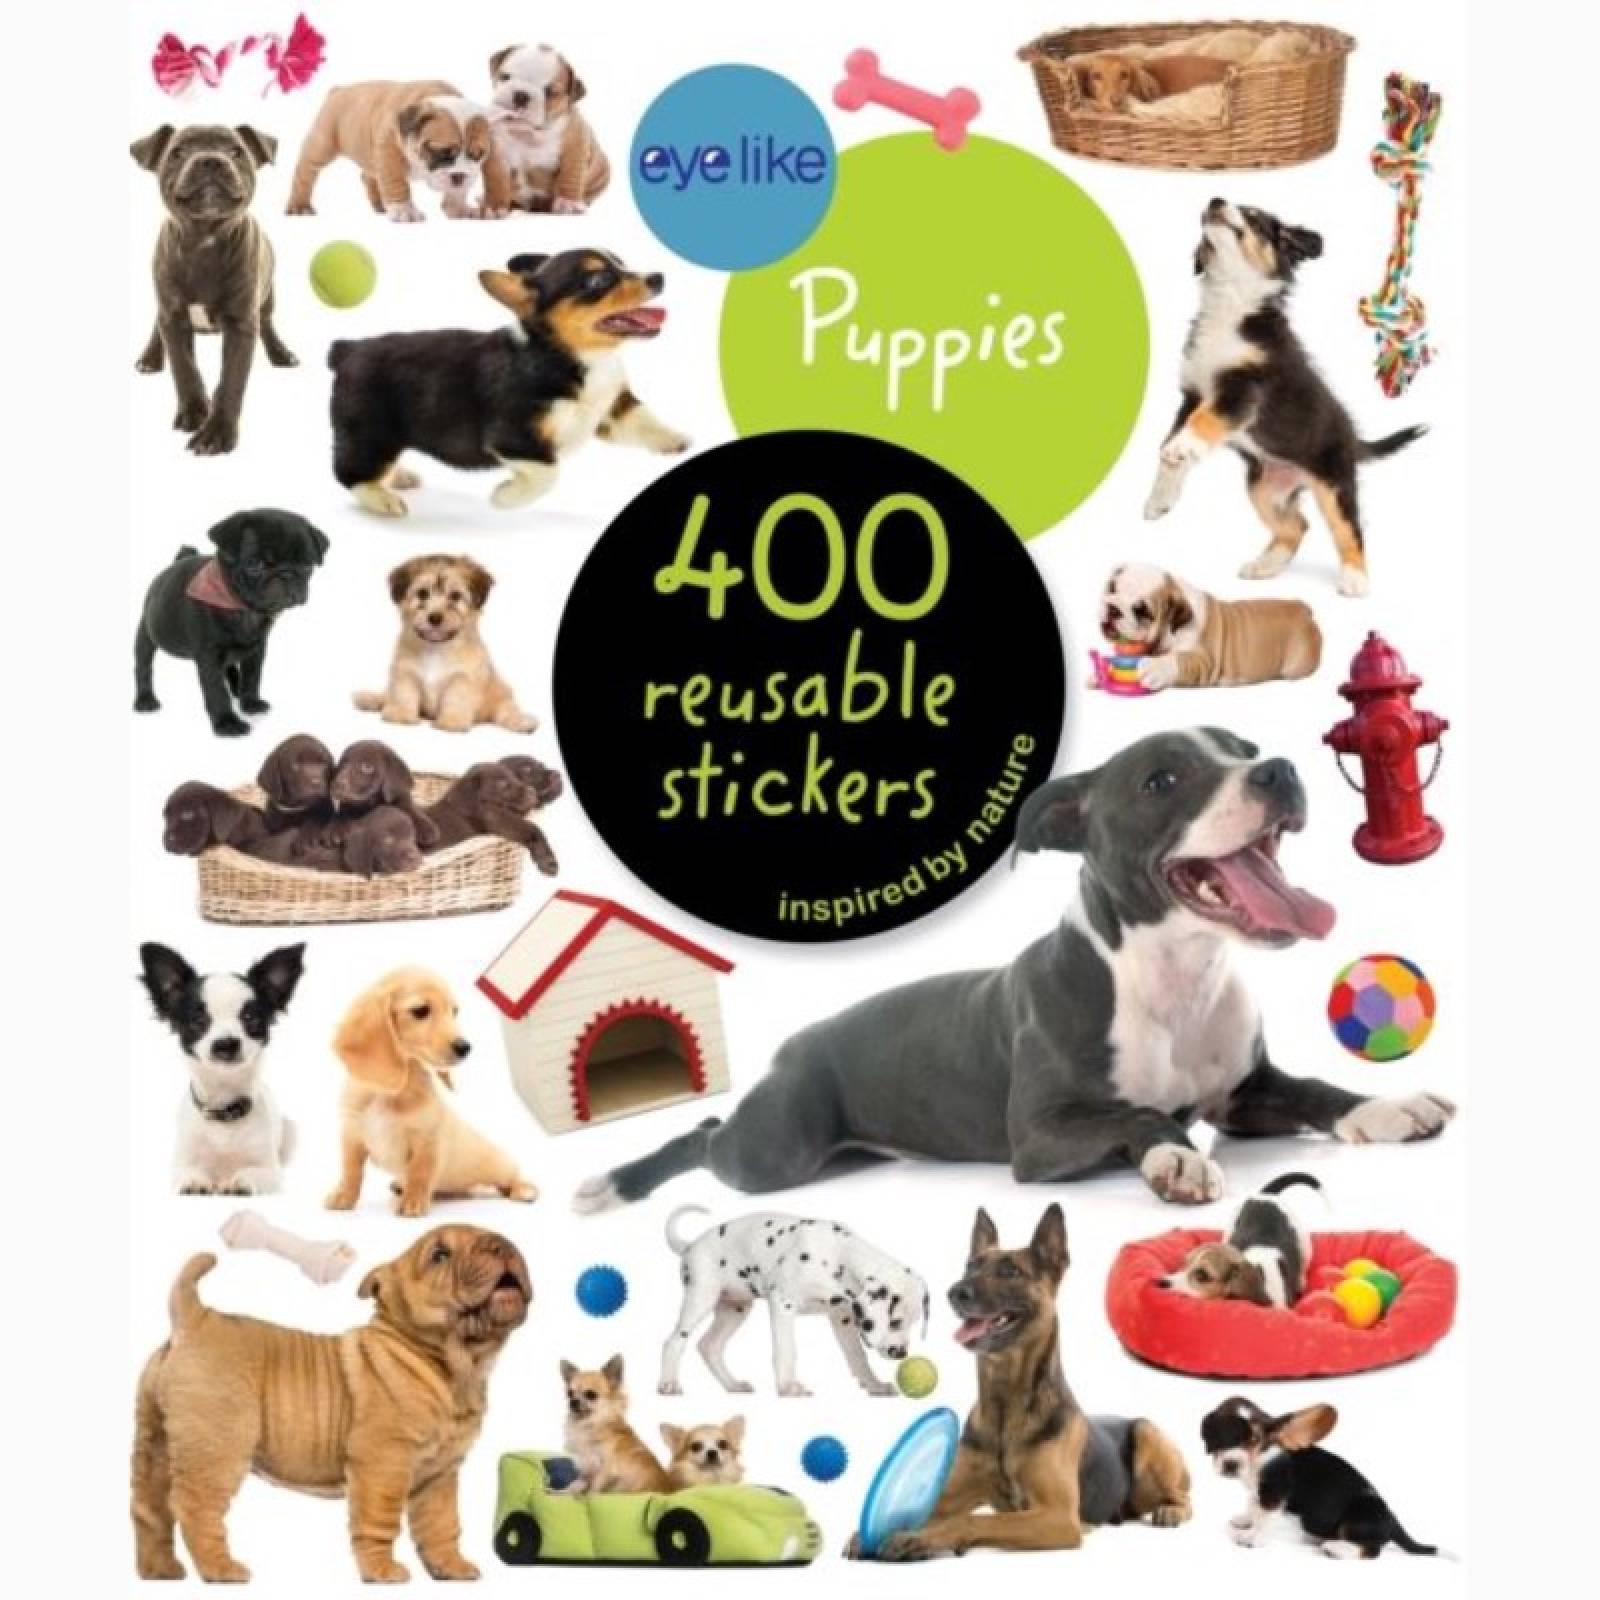 Eyelike Puppies: 400 Reusable Stickers thumbnails